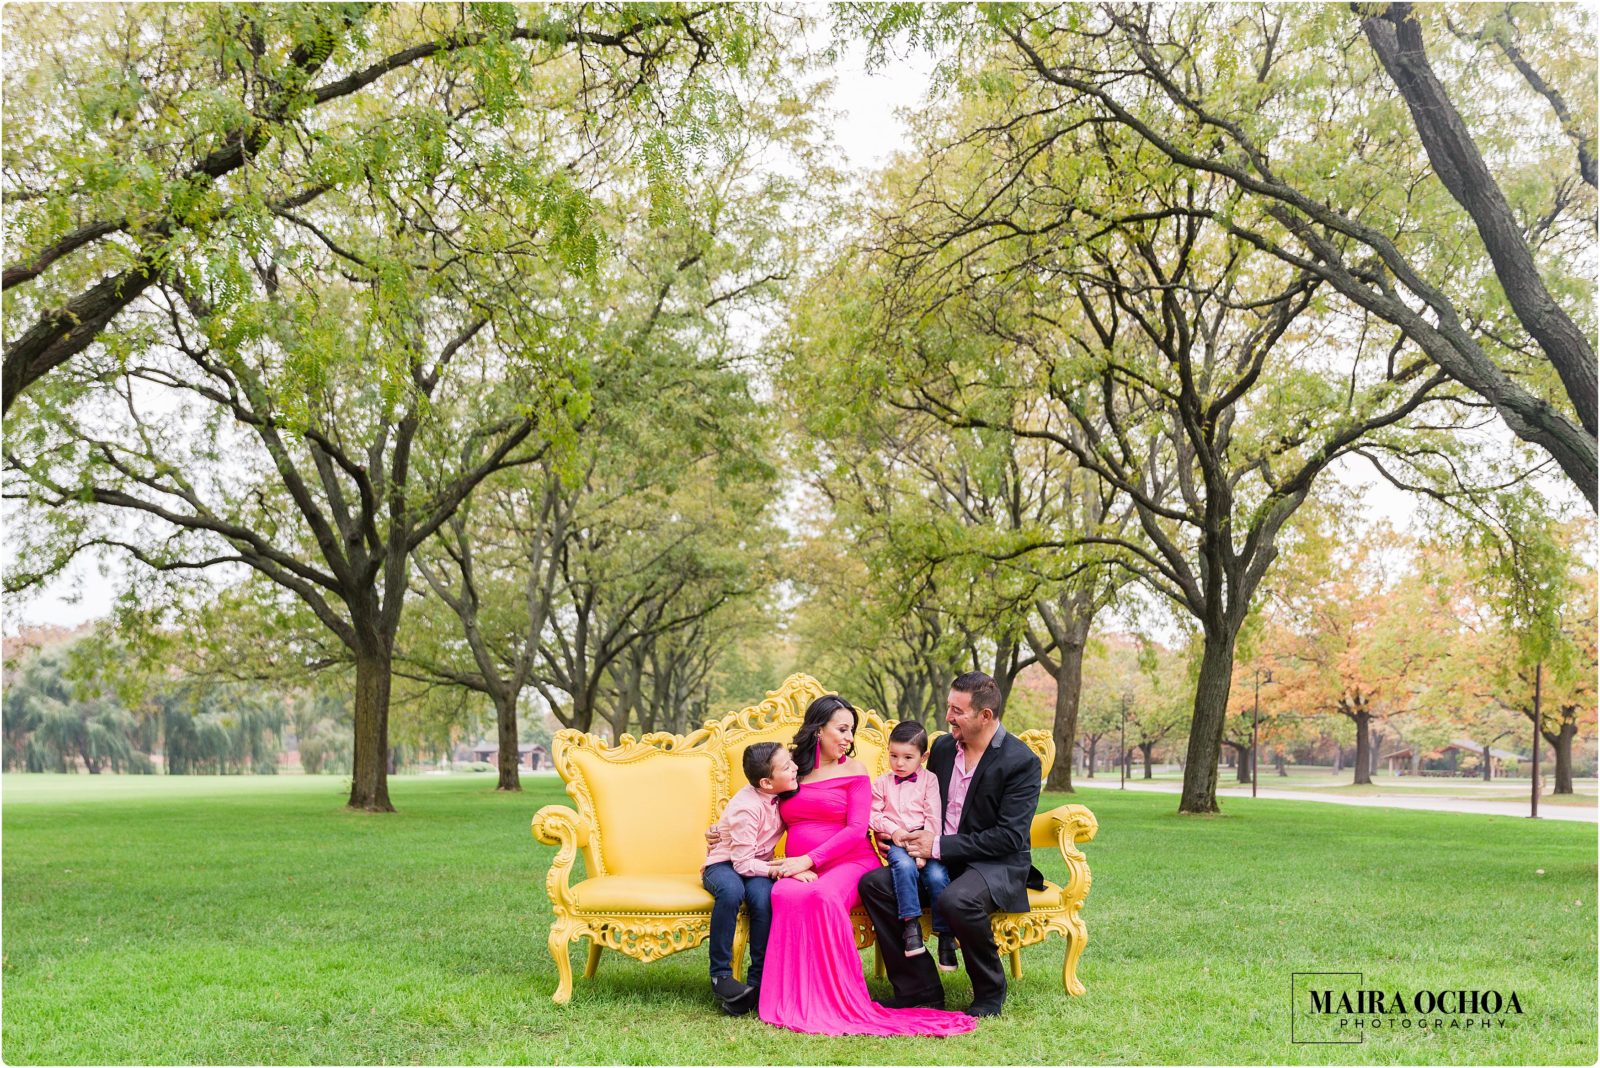 Cantigny Park, Wheaton, IL Family Session, Maternity Session, Children photos, Brothers, Kids, Expecting